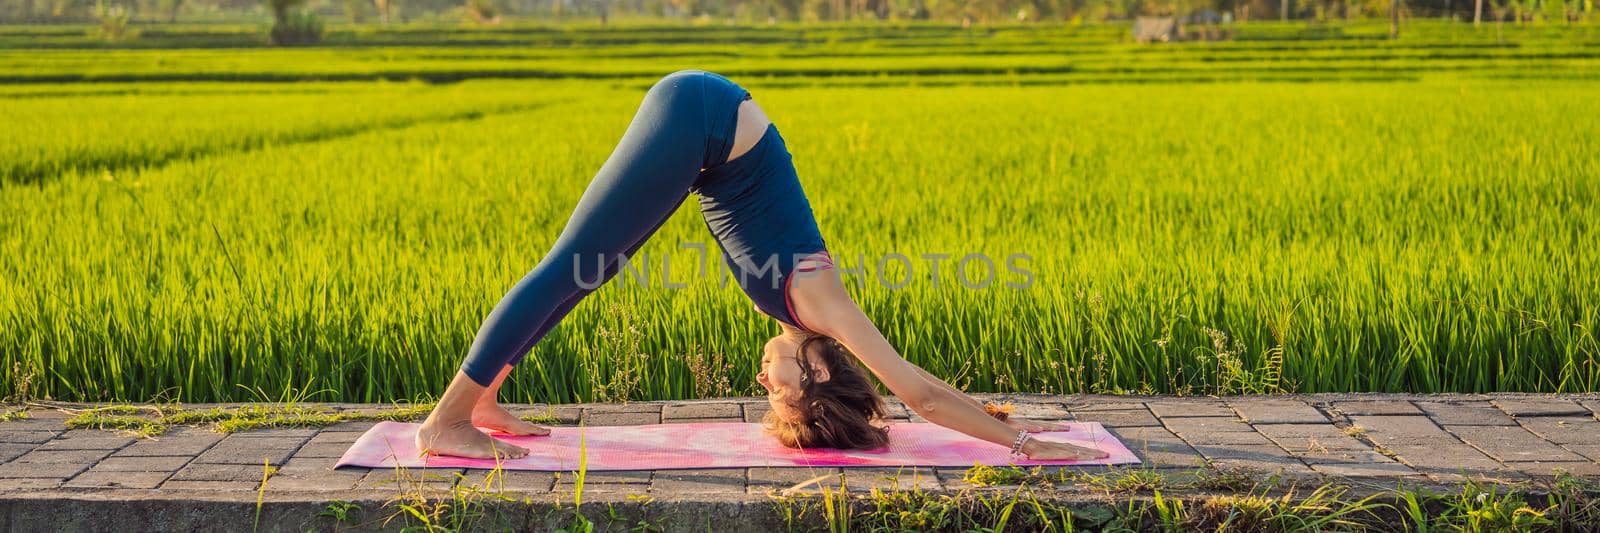 Young woman practice yoga outdoor in rice fields in the morning during wellness retreat in Bali BANNER, LONG FORMAT by galitskaya